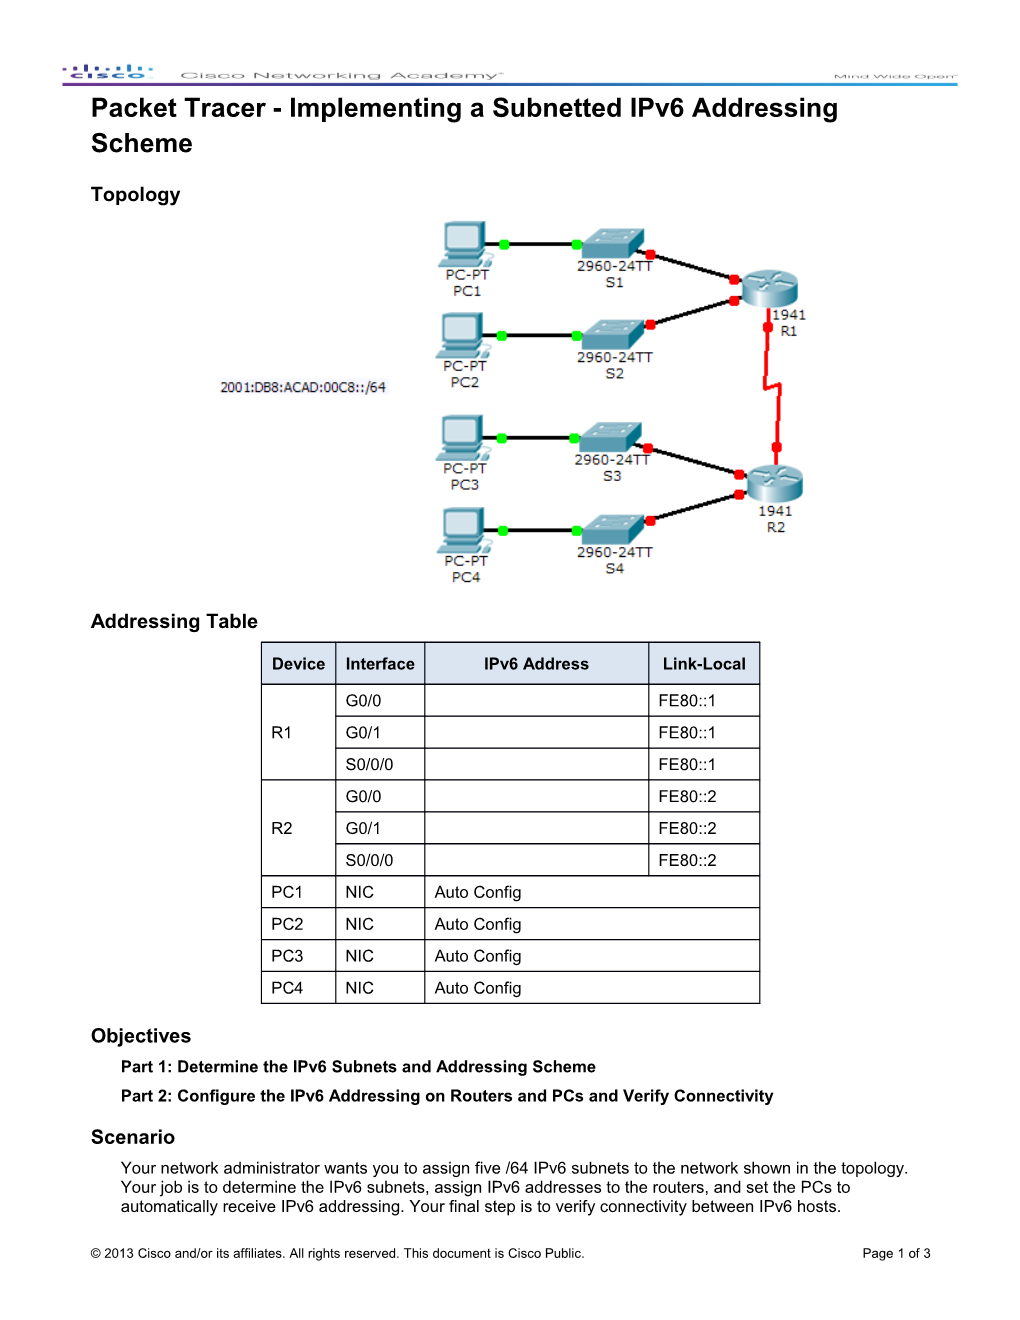 Packet Tracer - Implementing a Subnetted Ipv6 Addressing Scheme